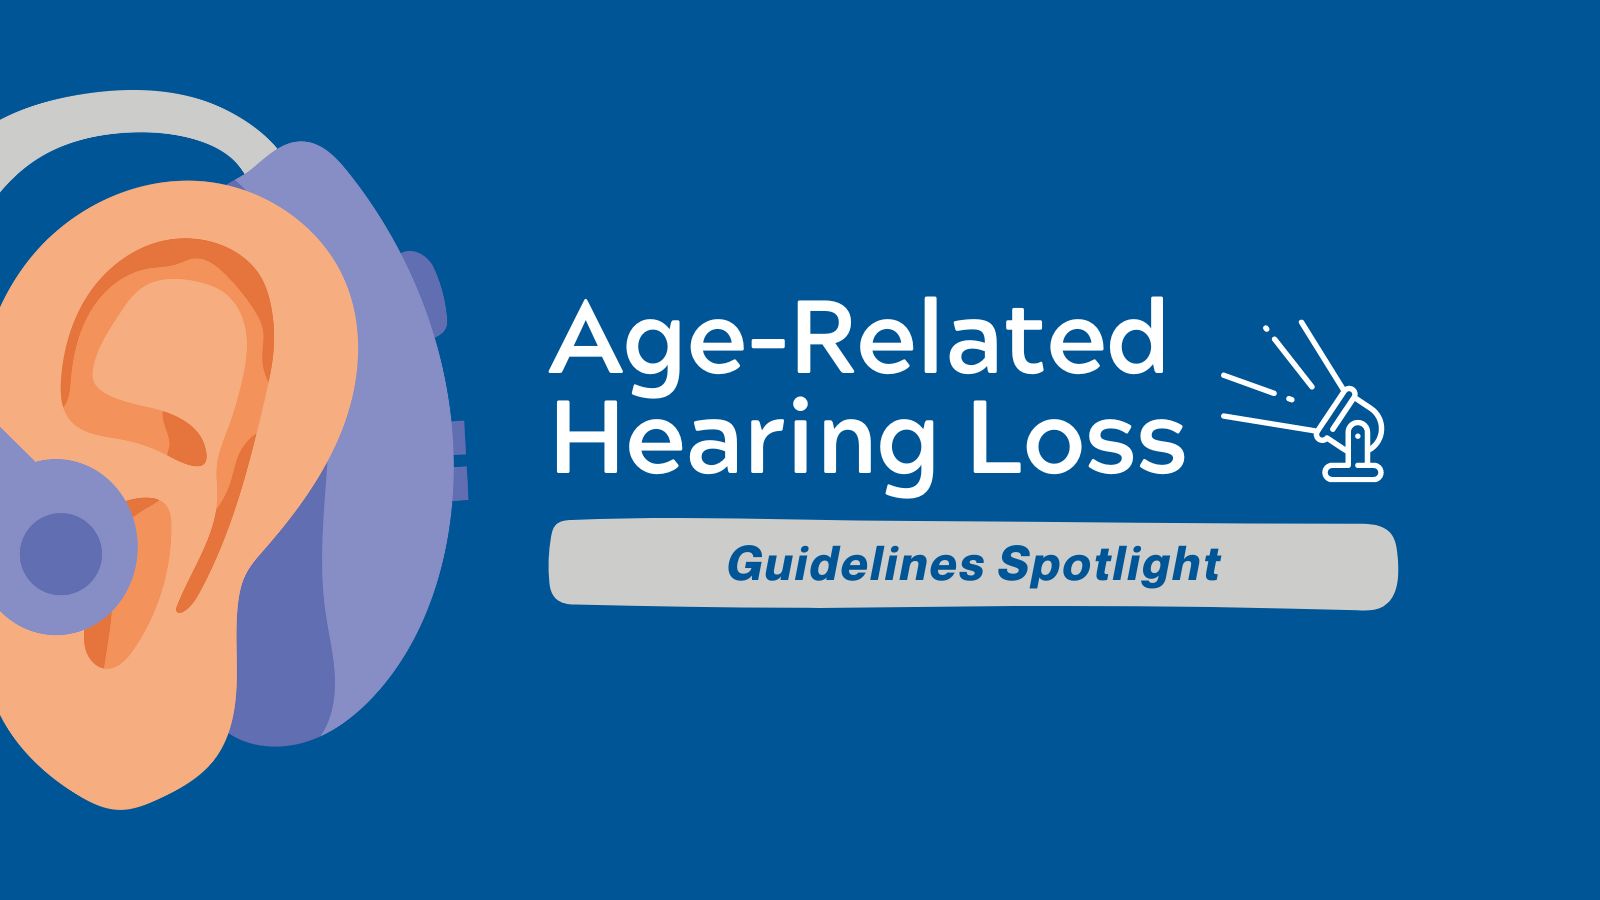 Guidelines Spotlight - Age-Related Hearing Loss